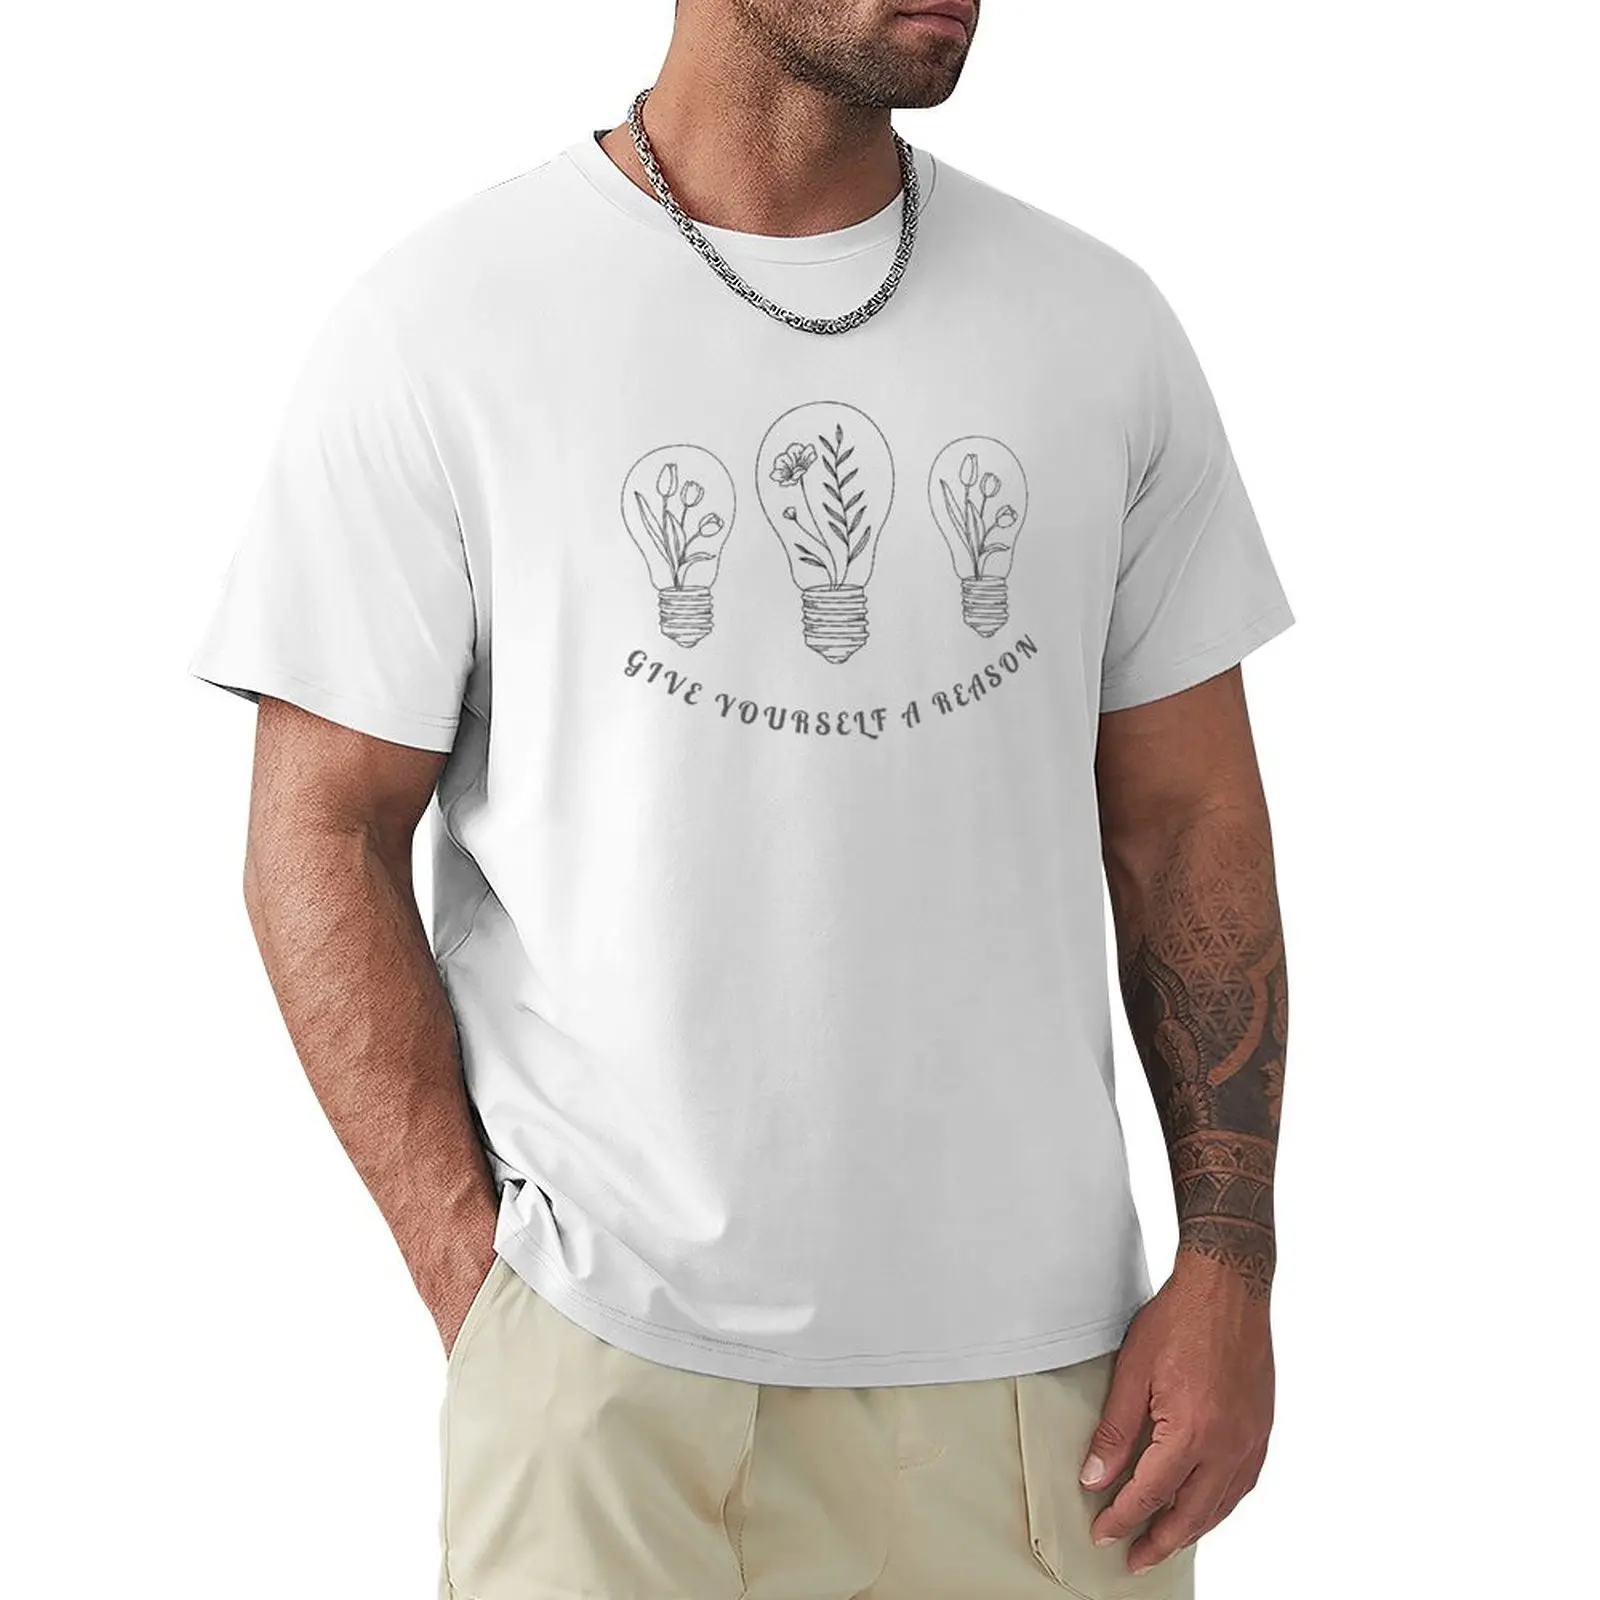 

Give yourself a reason. Call your mom T-Shirt oversizeds Aesthetic clothing customs design your own oversized mens t shirts pack